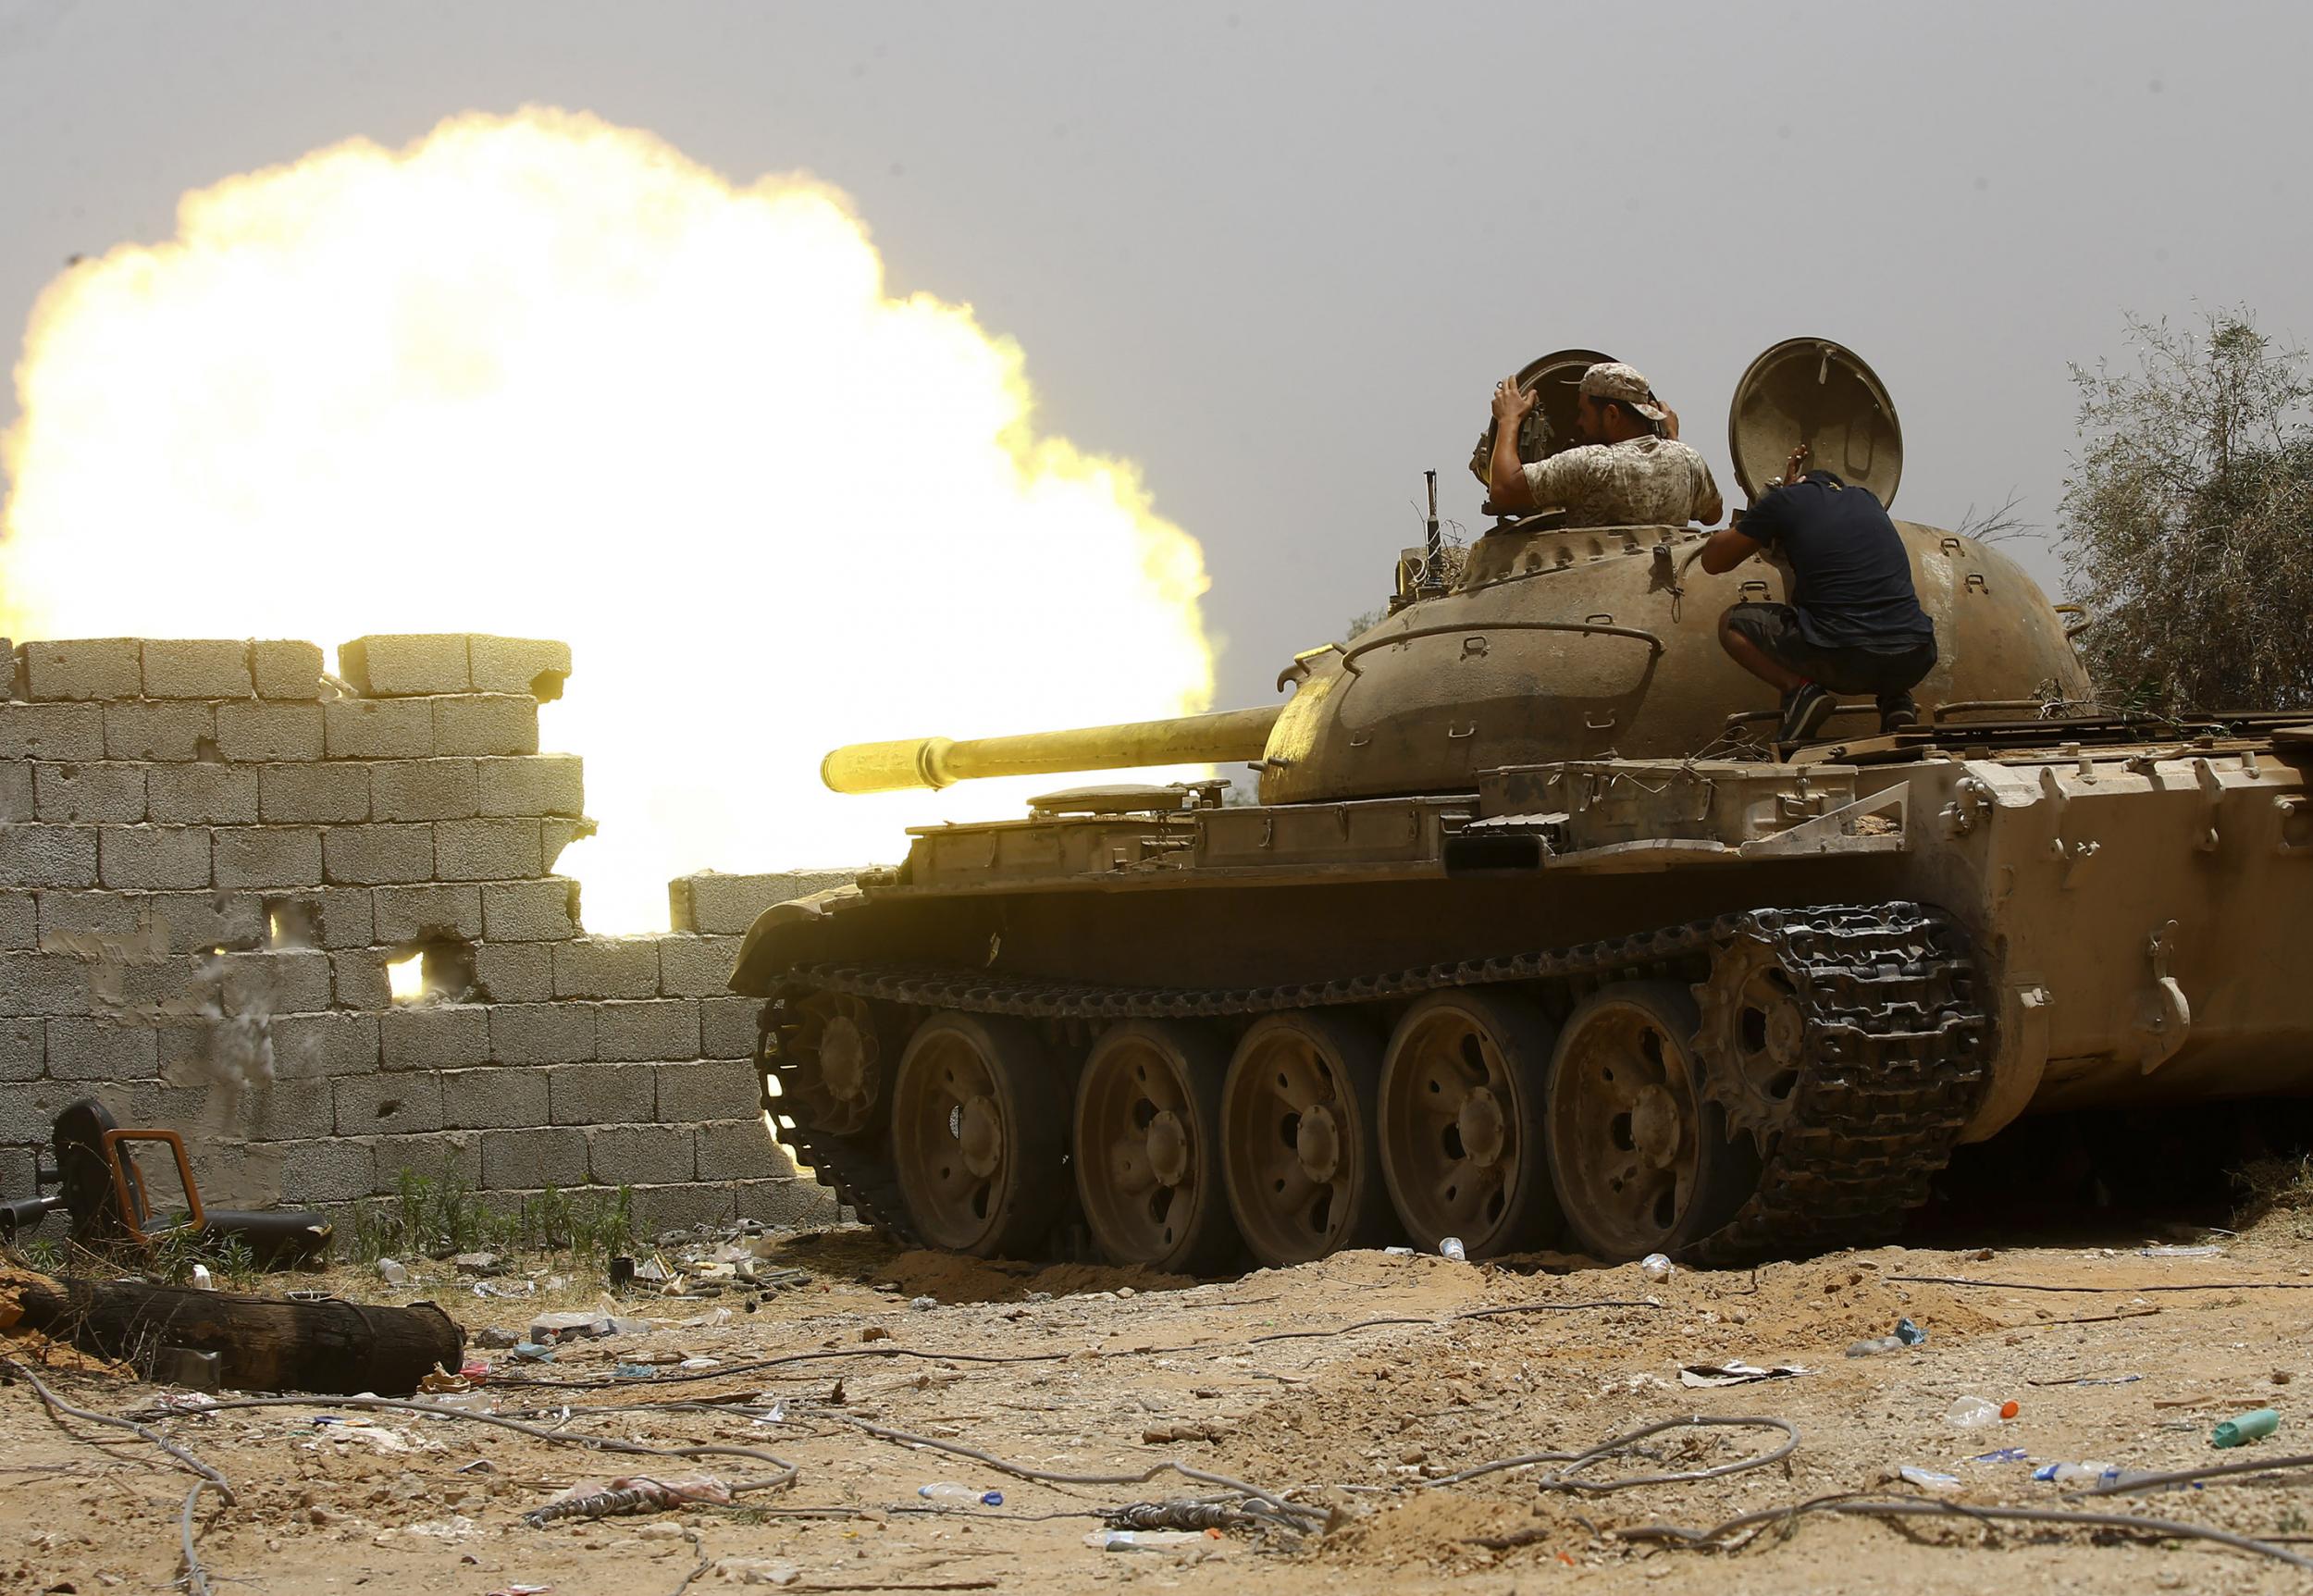 Many parts of Libya, including Tripoli, have become a battleground